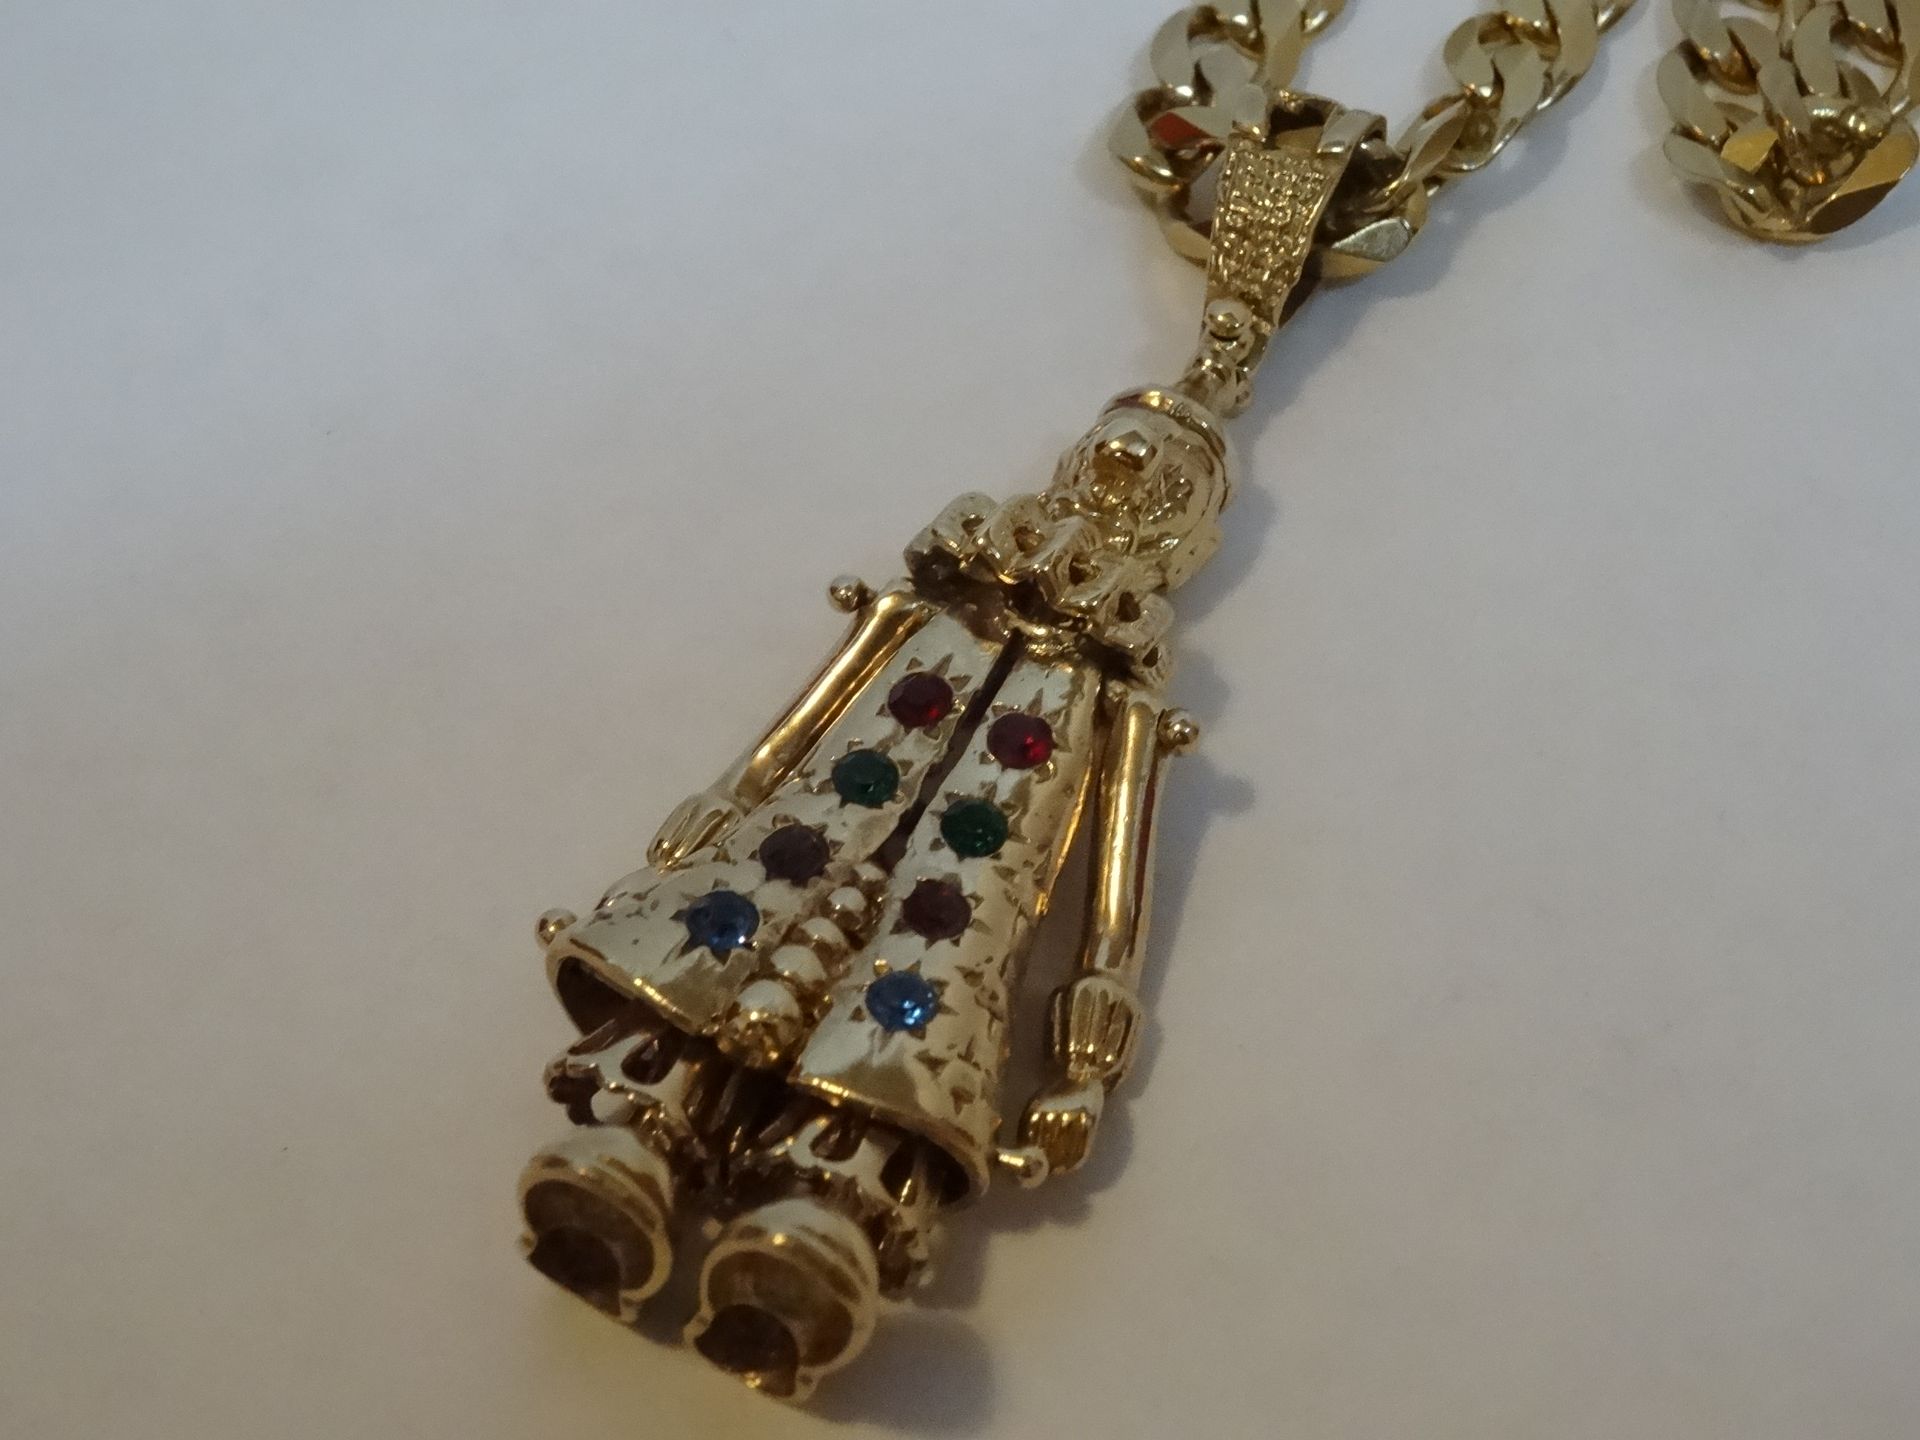 9 Carat Yellow Gold Curb Chain & Moveable Clown Pendant. - Image 3 of 6